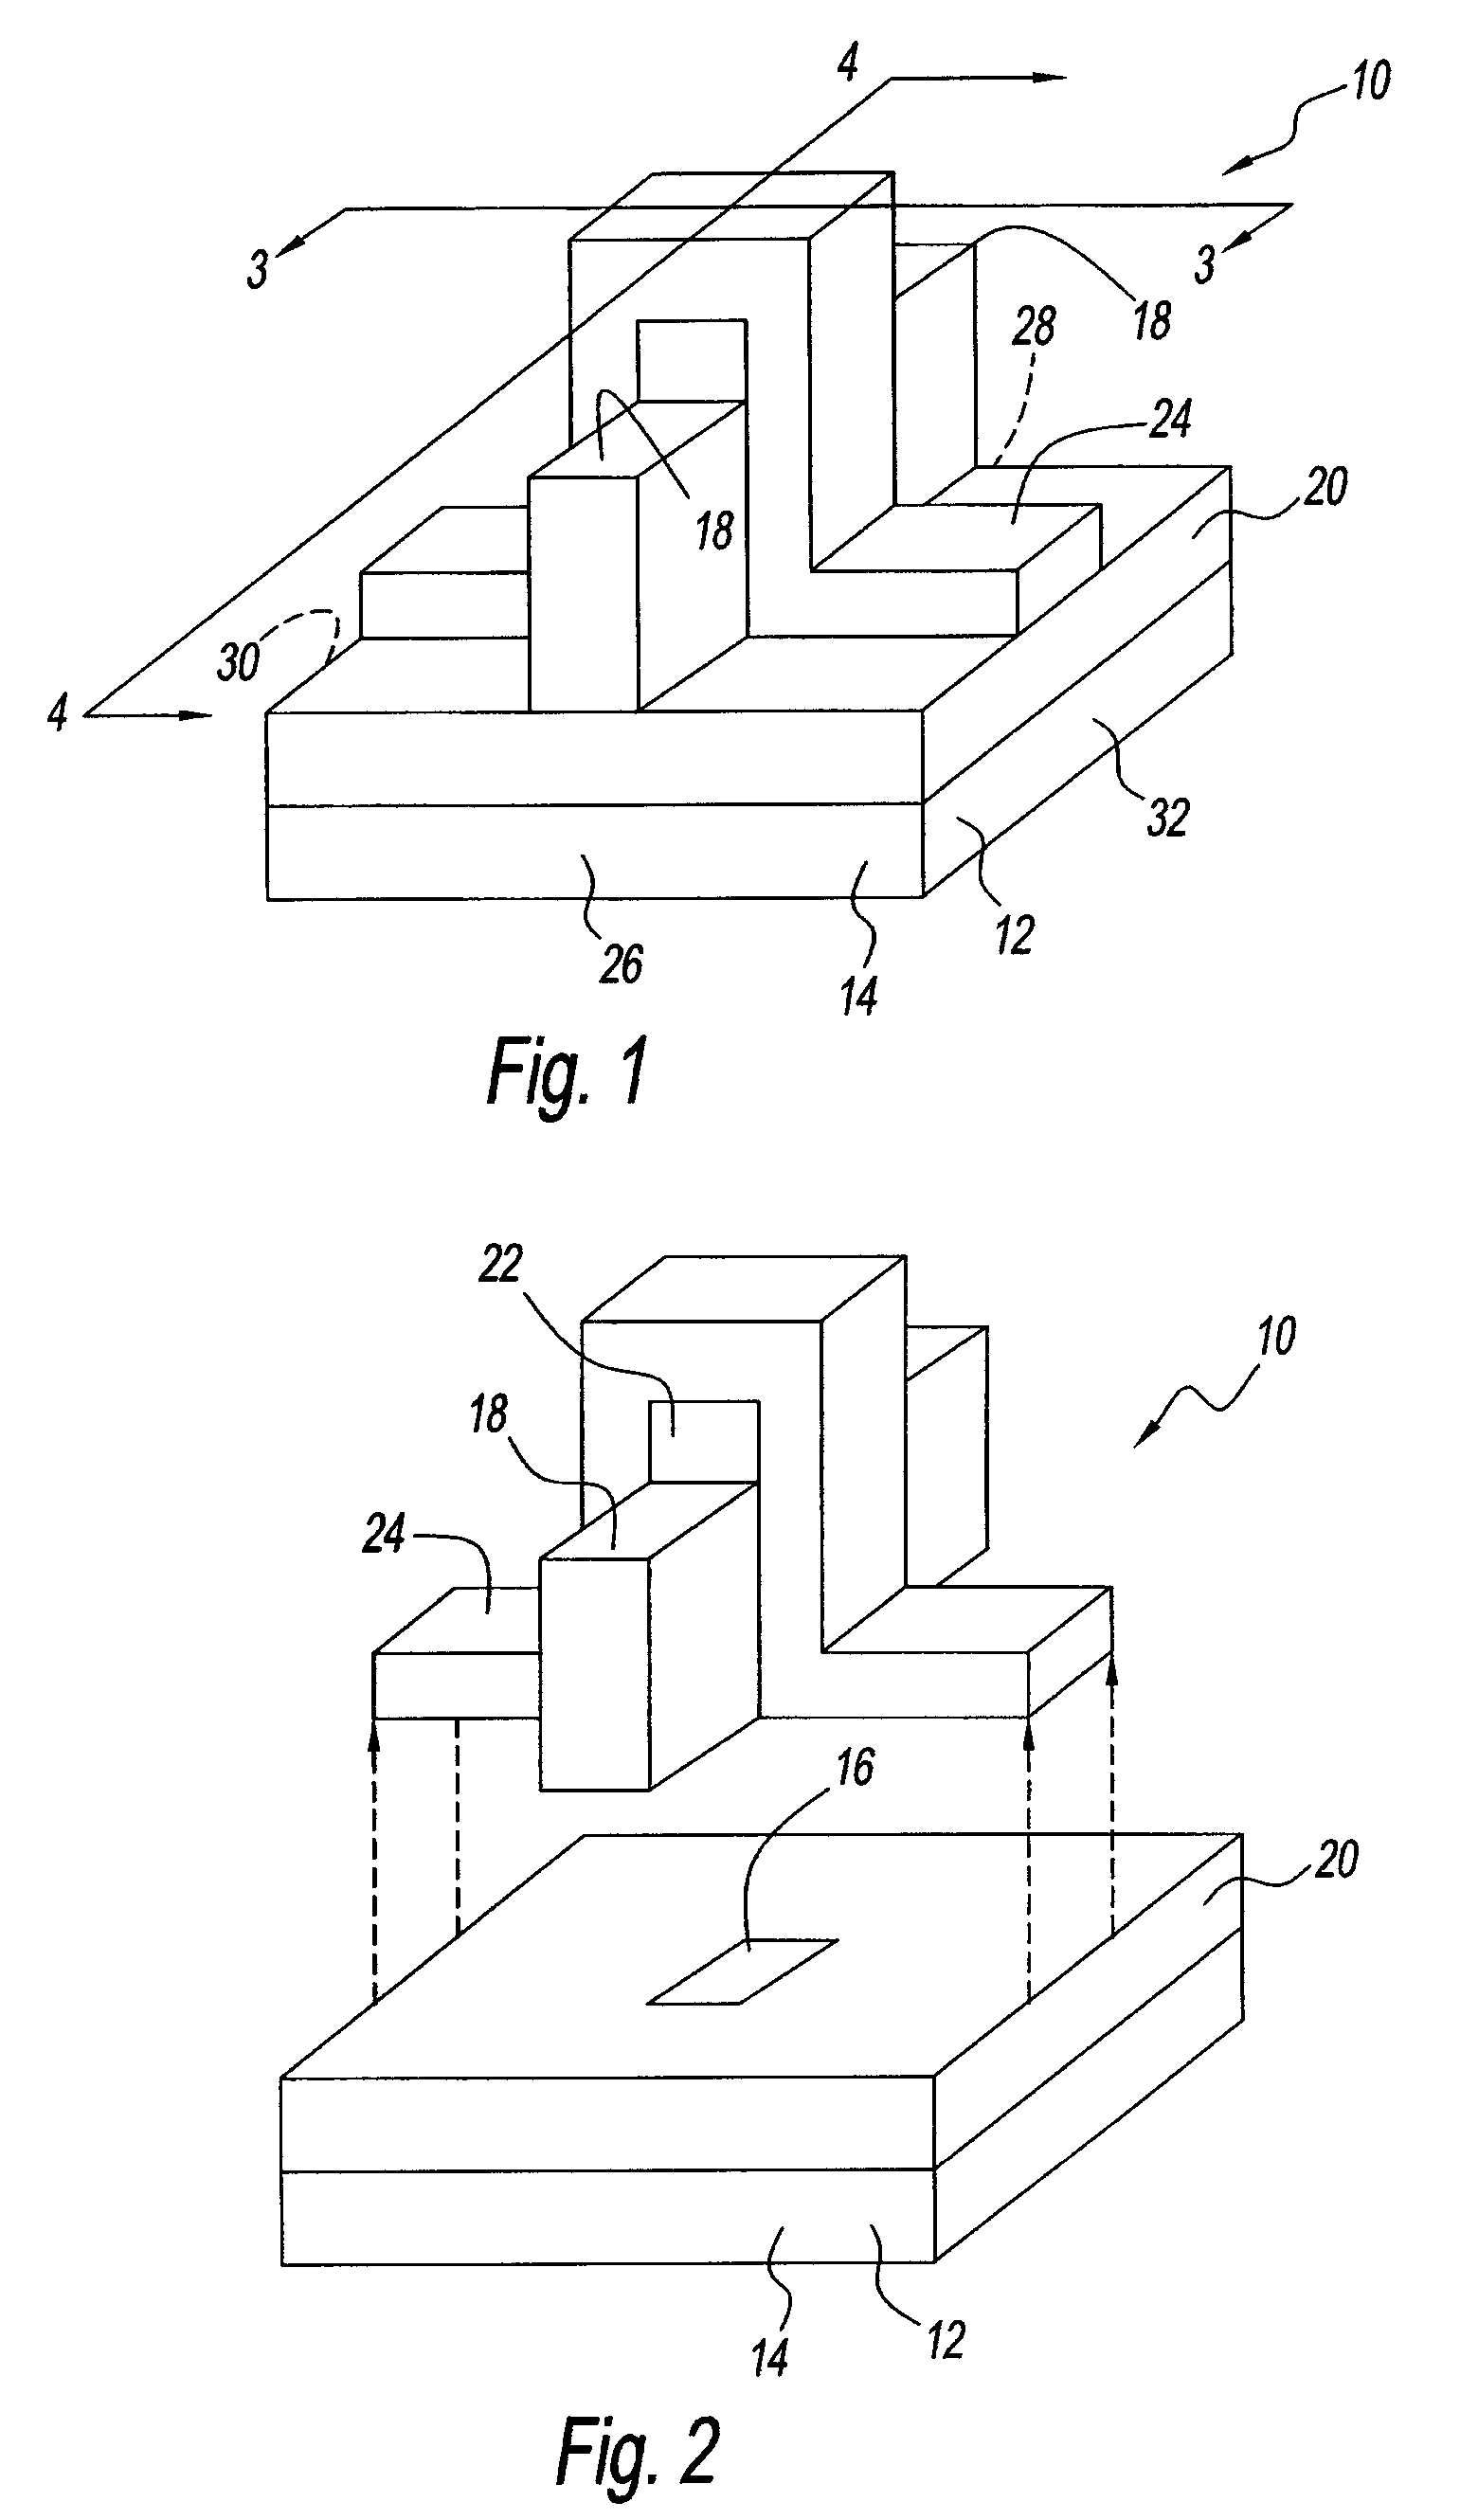 Process for making finfet device with body contact and buried oxide junction isolation